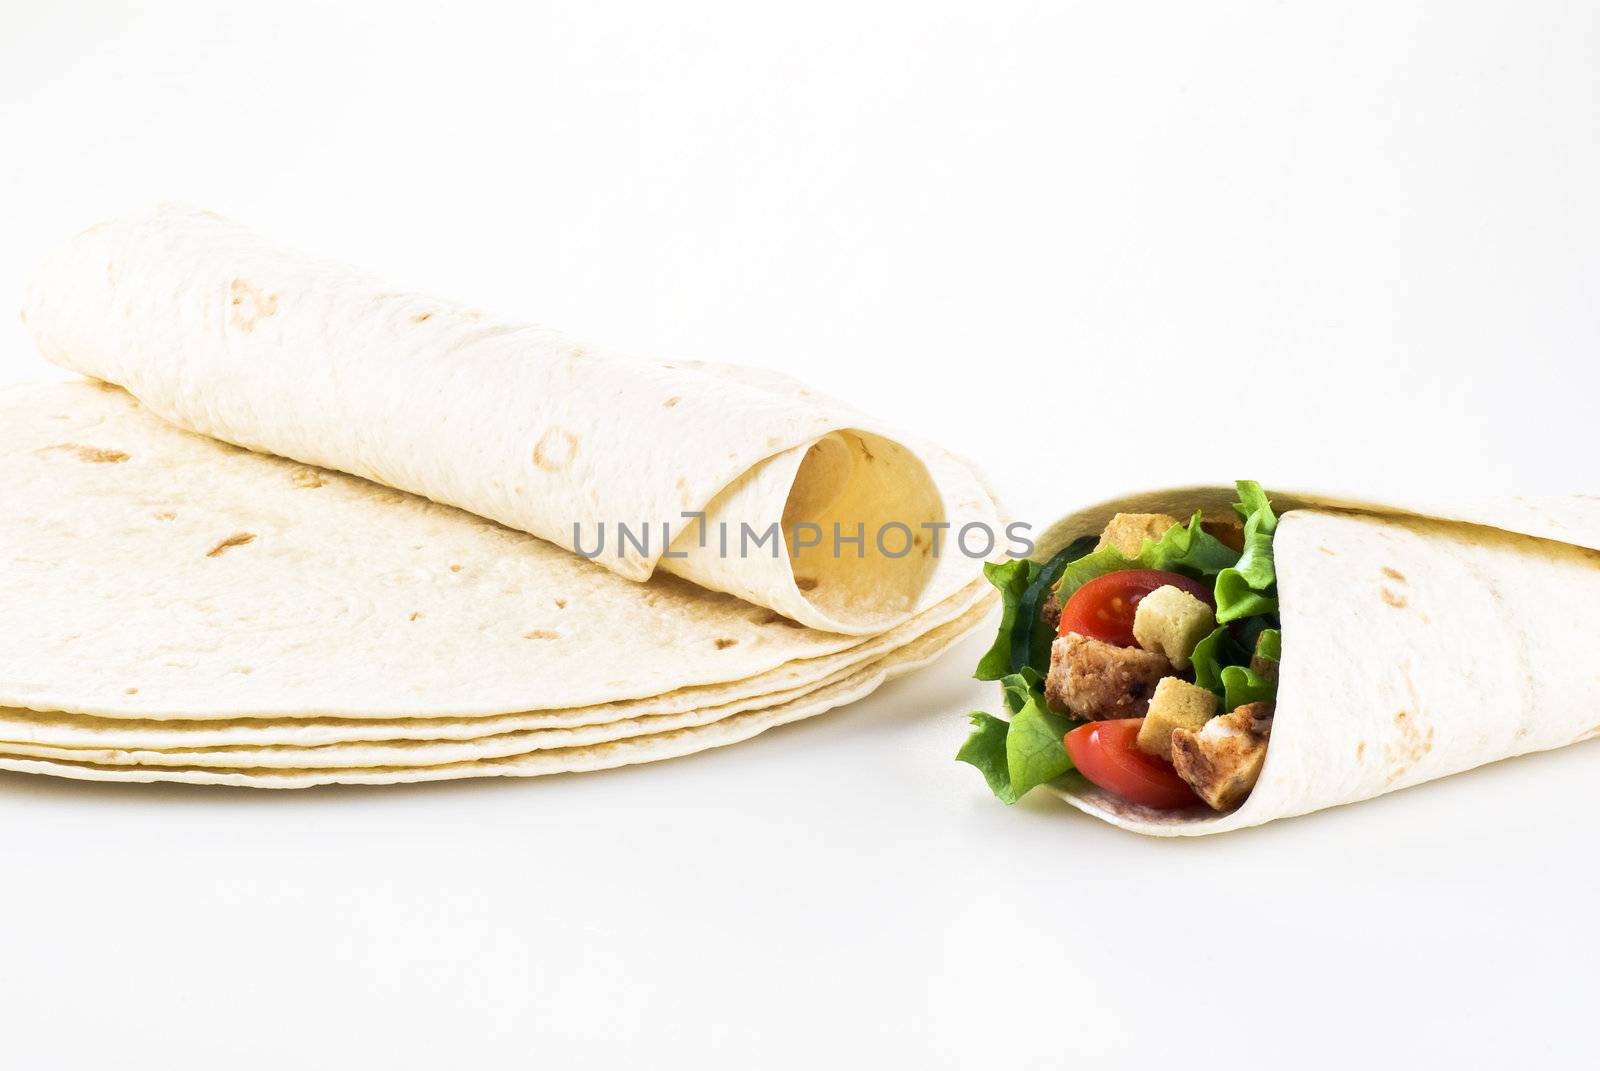 Tortilla filled with lettuce chicken tomatoes and cucumber with plain tortillas